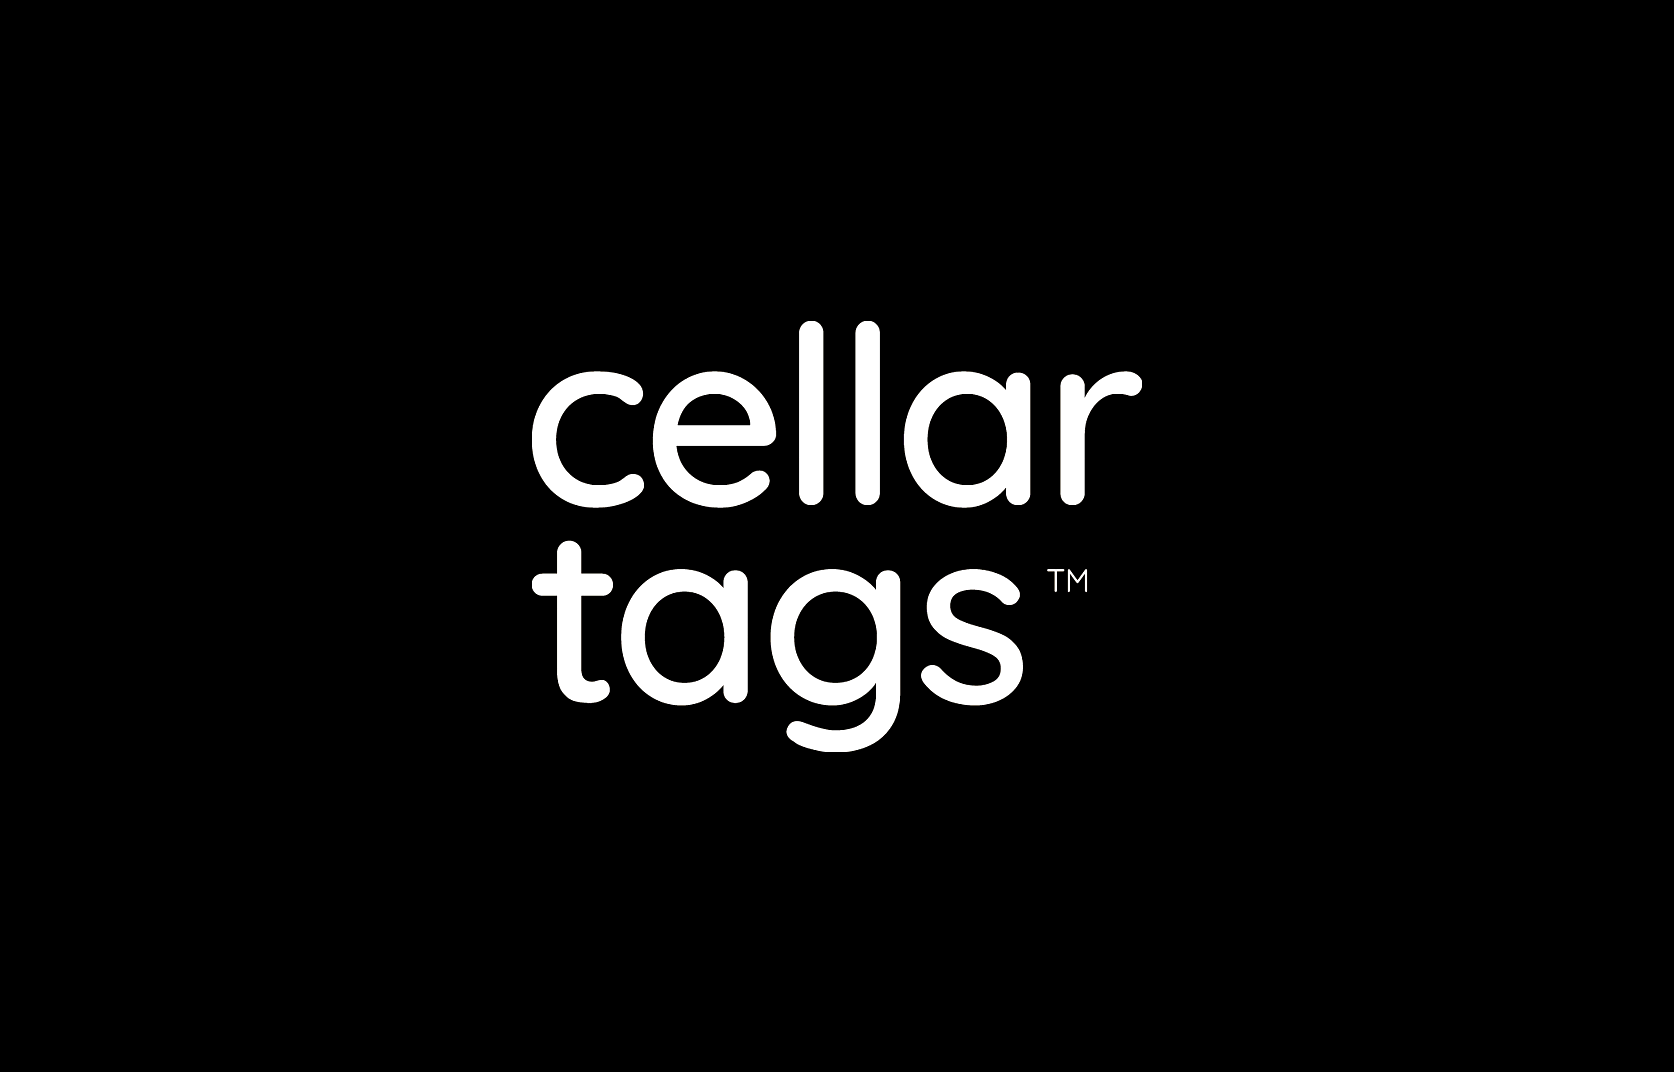 The logo for cellar tags on a black background.